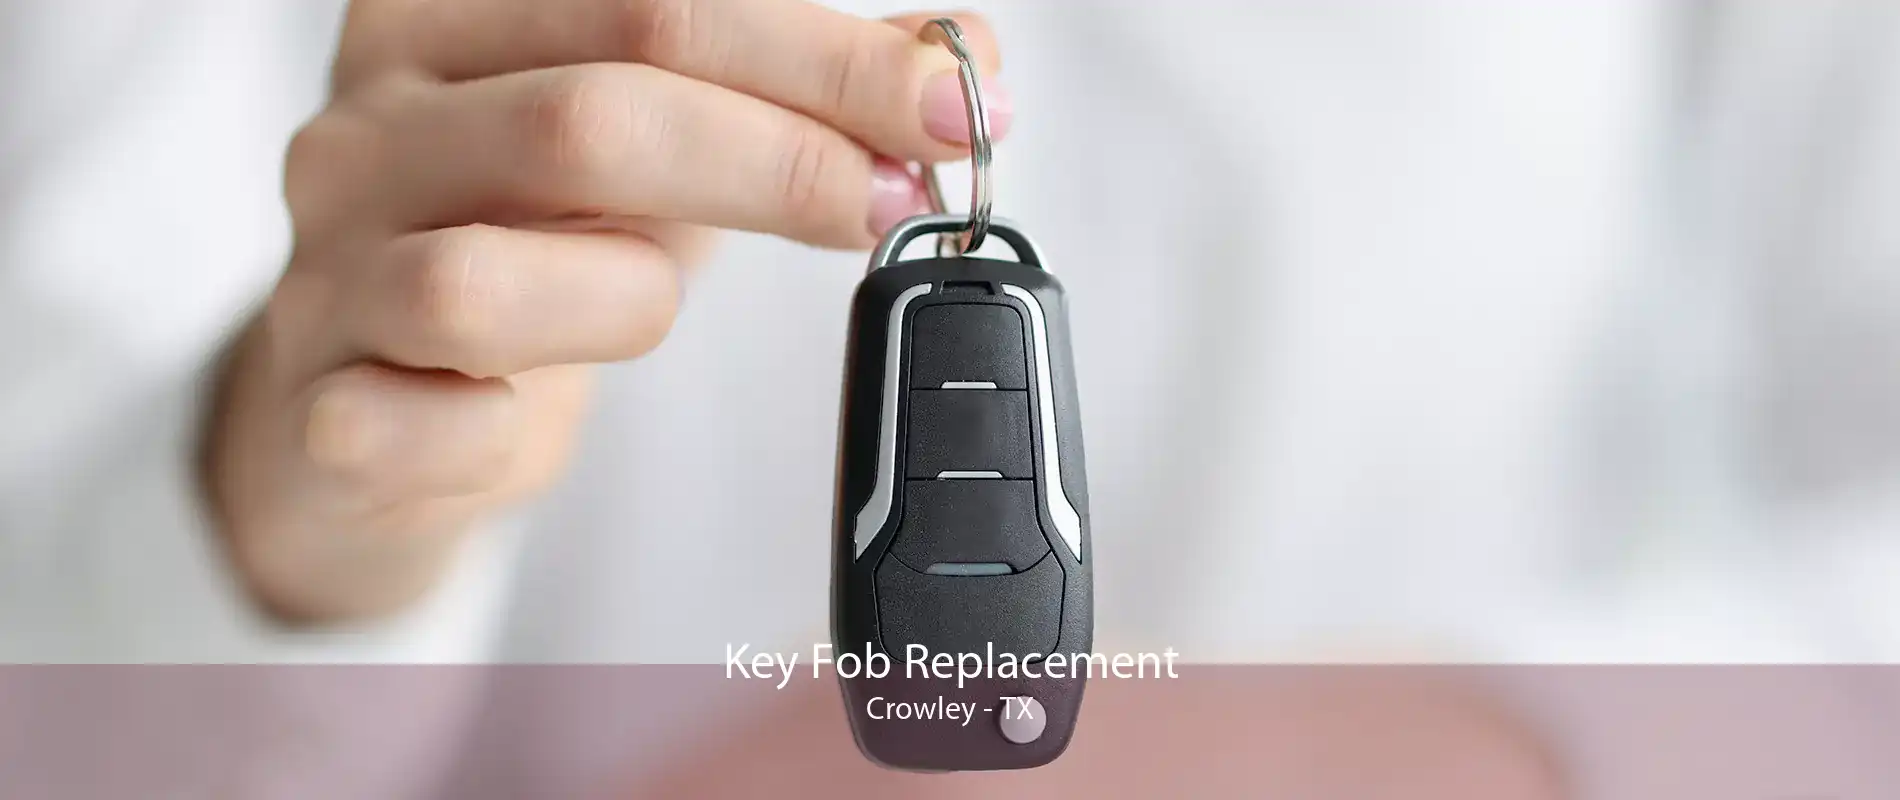 Key Fob Replacement Crowley - TX